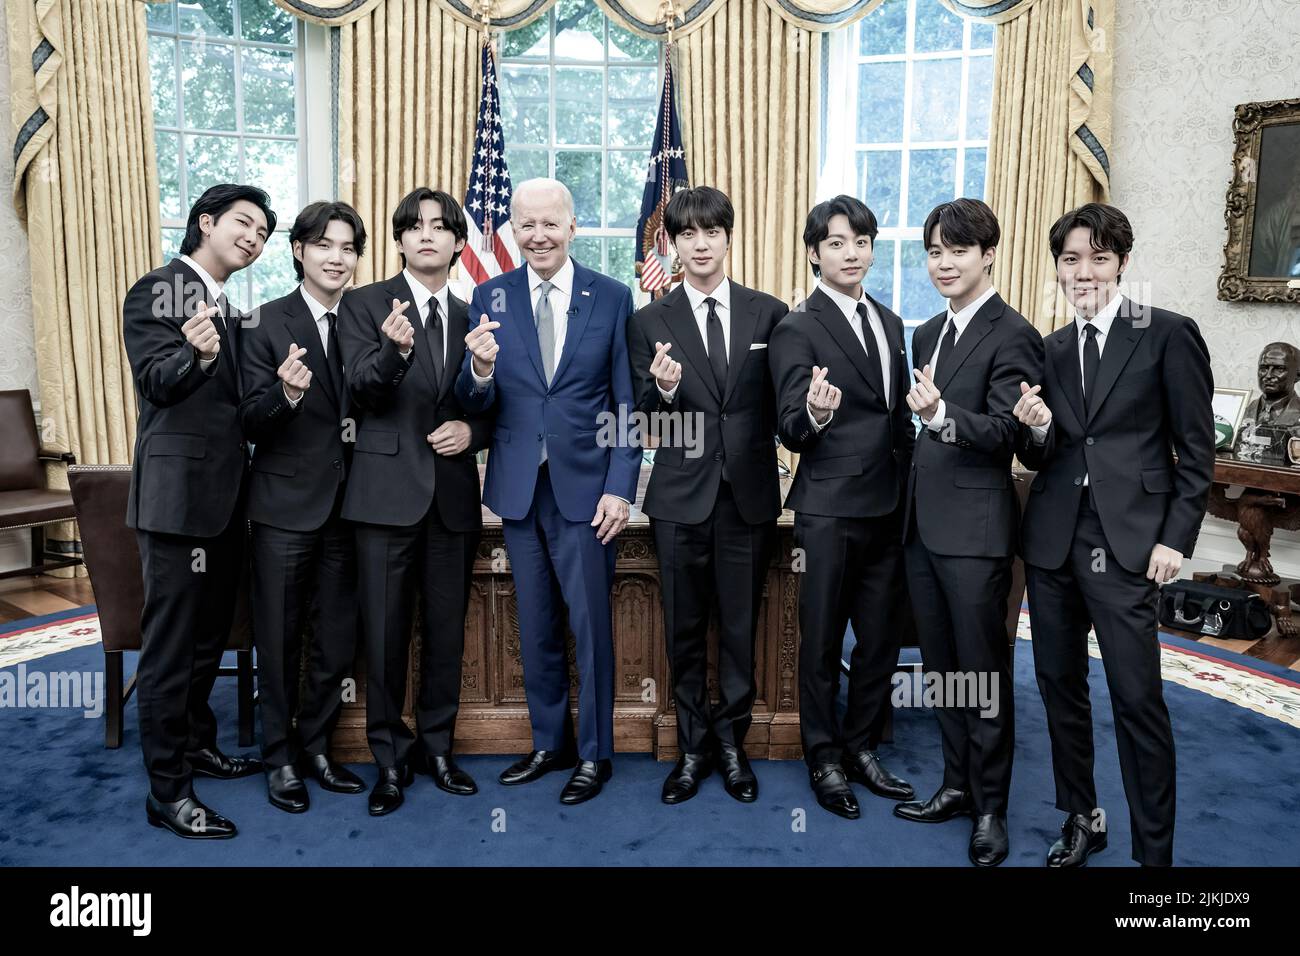 President Joe Biden records a digital video with the K-pop singing group BTS on Tuesday, May 31, 2022, in the Oval Office of the White House.  (Official White House Photo by Adam Schultz) Stock Photo